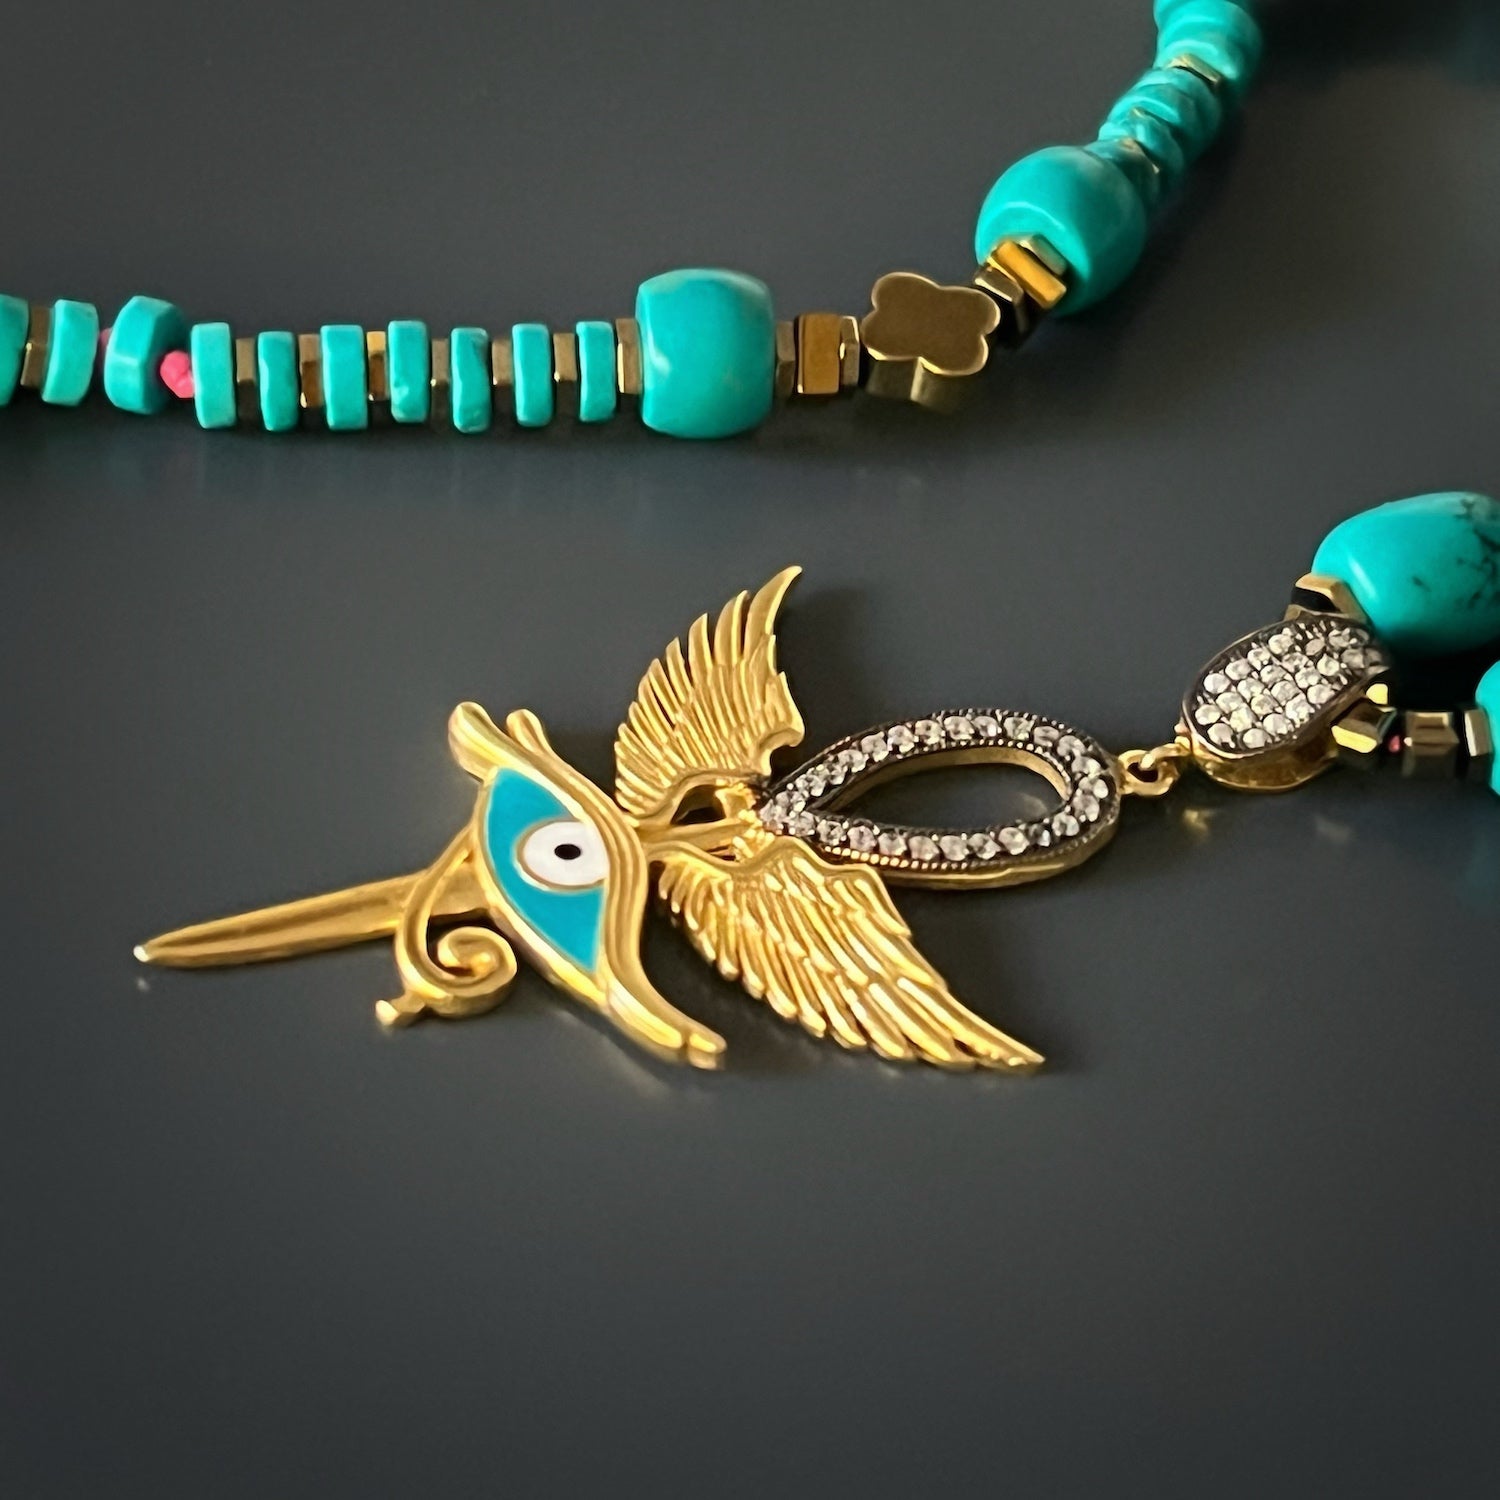 The Unique Eye of Horus Turquoise Necklace adding a touch of cultural and historical significance